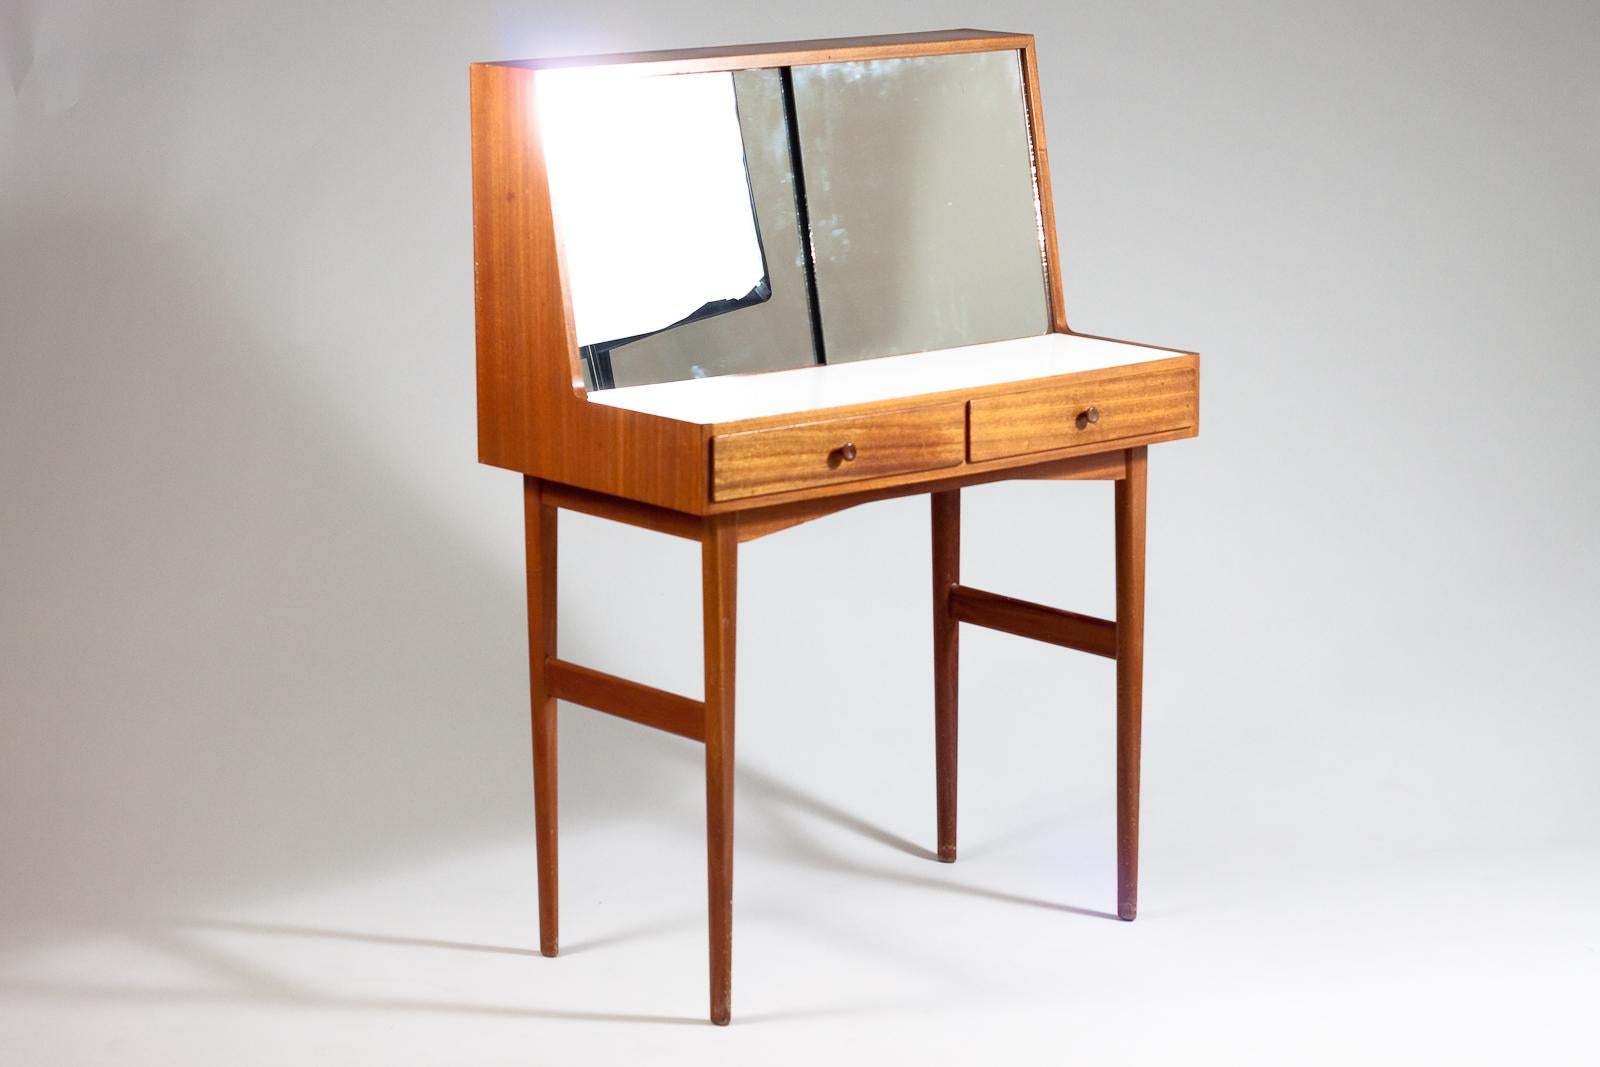 Stylish Mid-Century Modern vanity desk with two drawers made in mahogany. Two sliding mirrors covering two glass shelves for storing make-up and other necessary things.